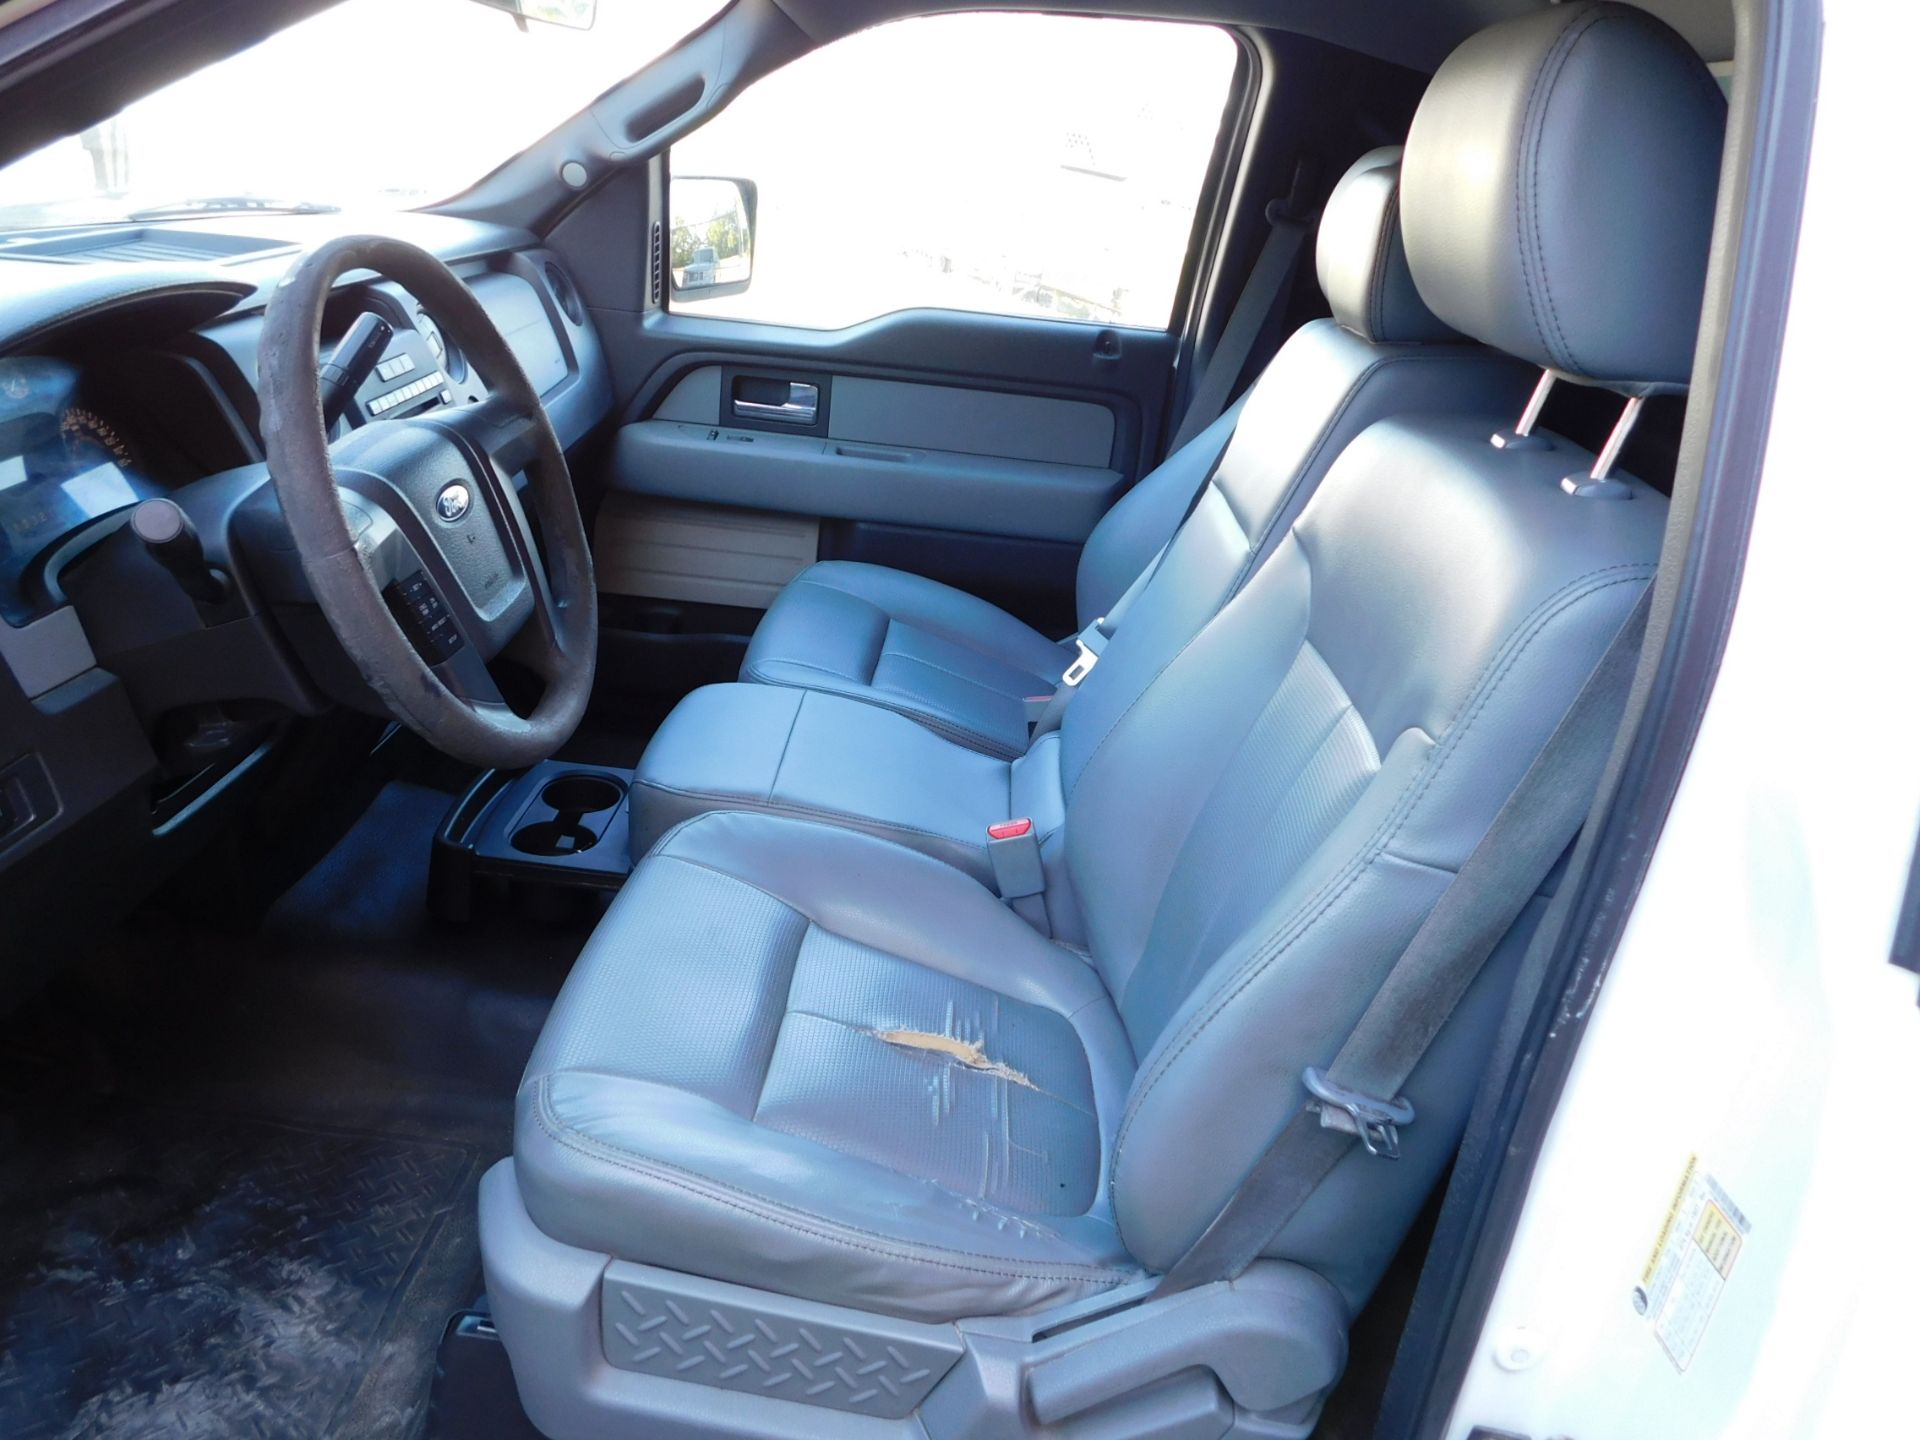 2011 Ford Pick up F-150XL vin 1FTMF1CM3CKD12942, Automatic Transmission, PW, Pl, 8'Bed w/Cap 146,289 - Image 31 of 46